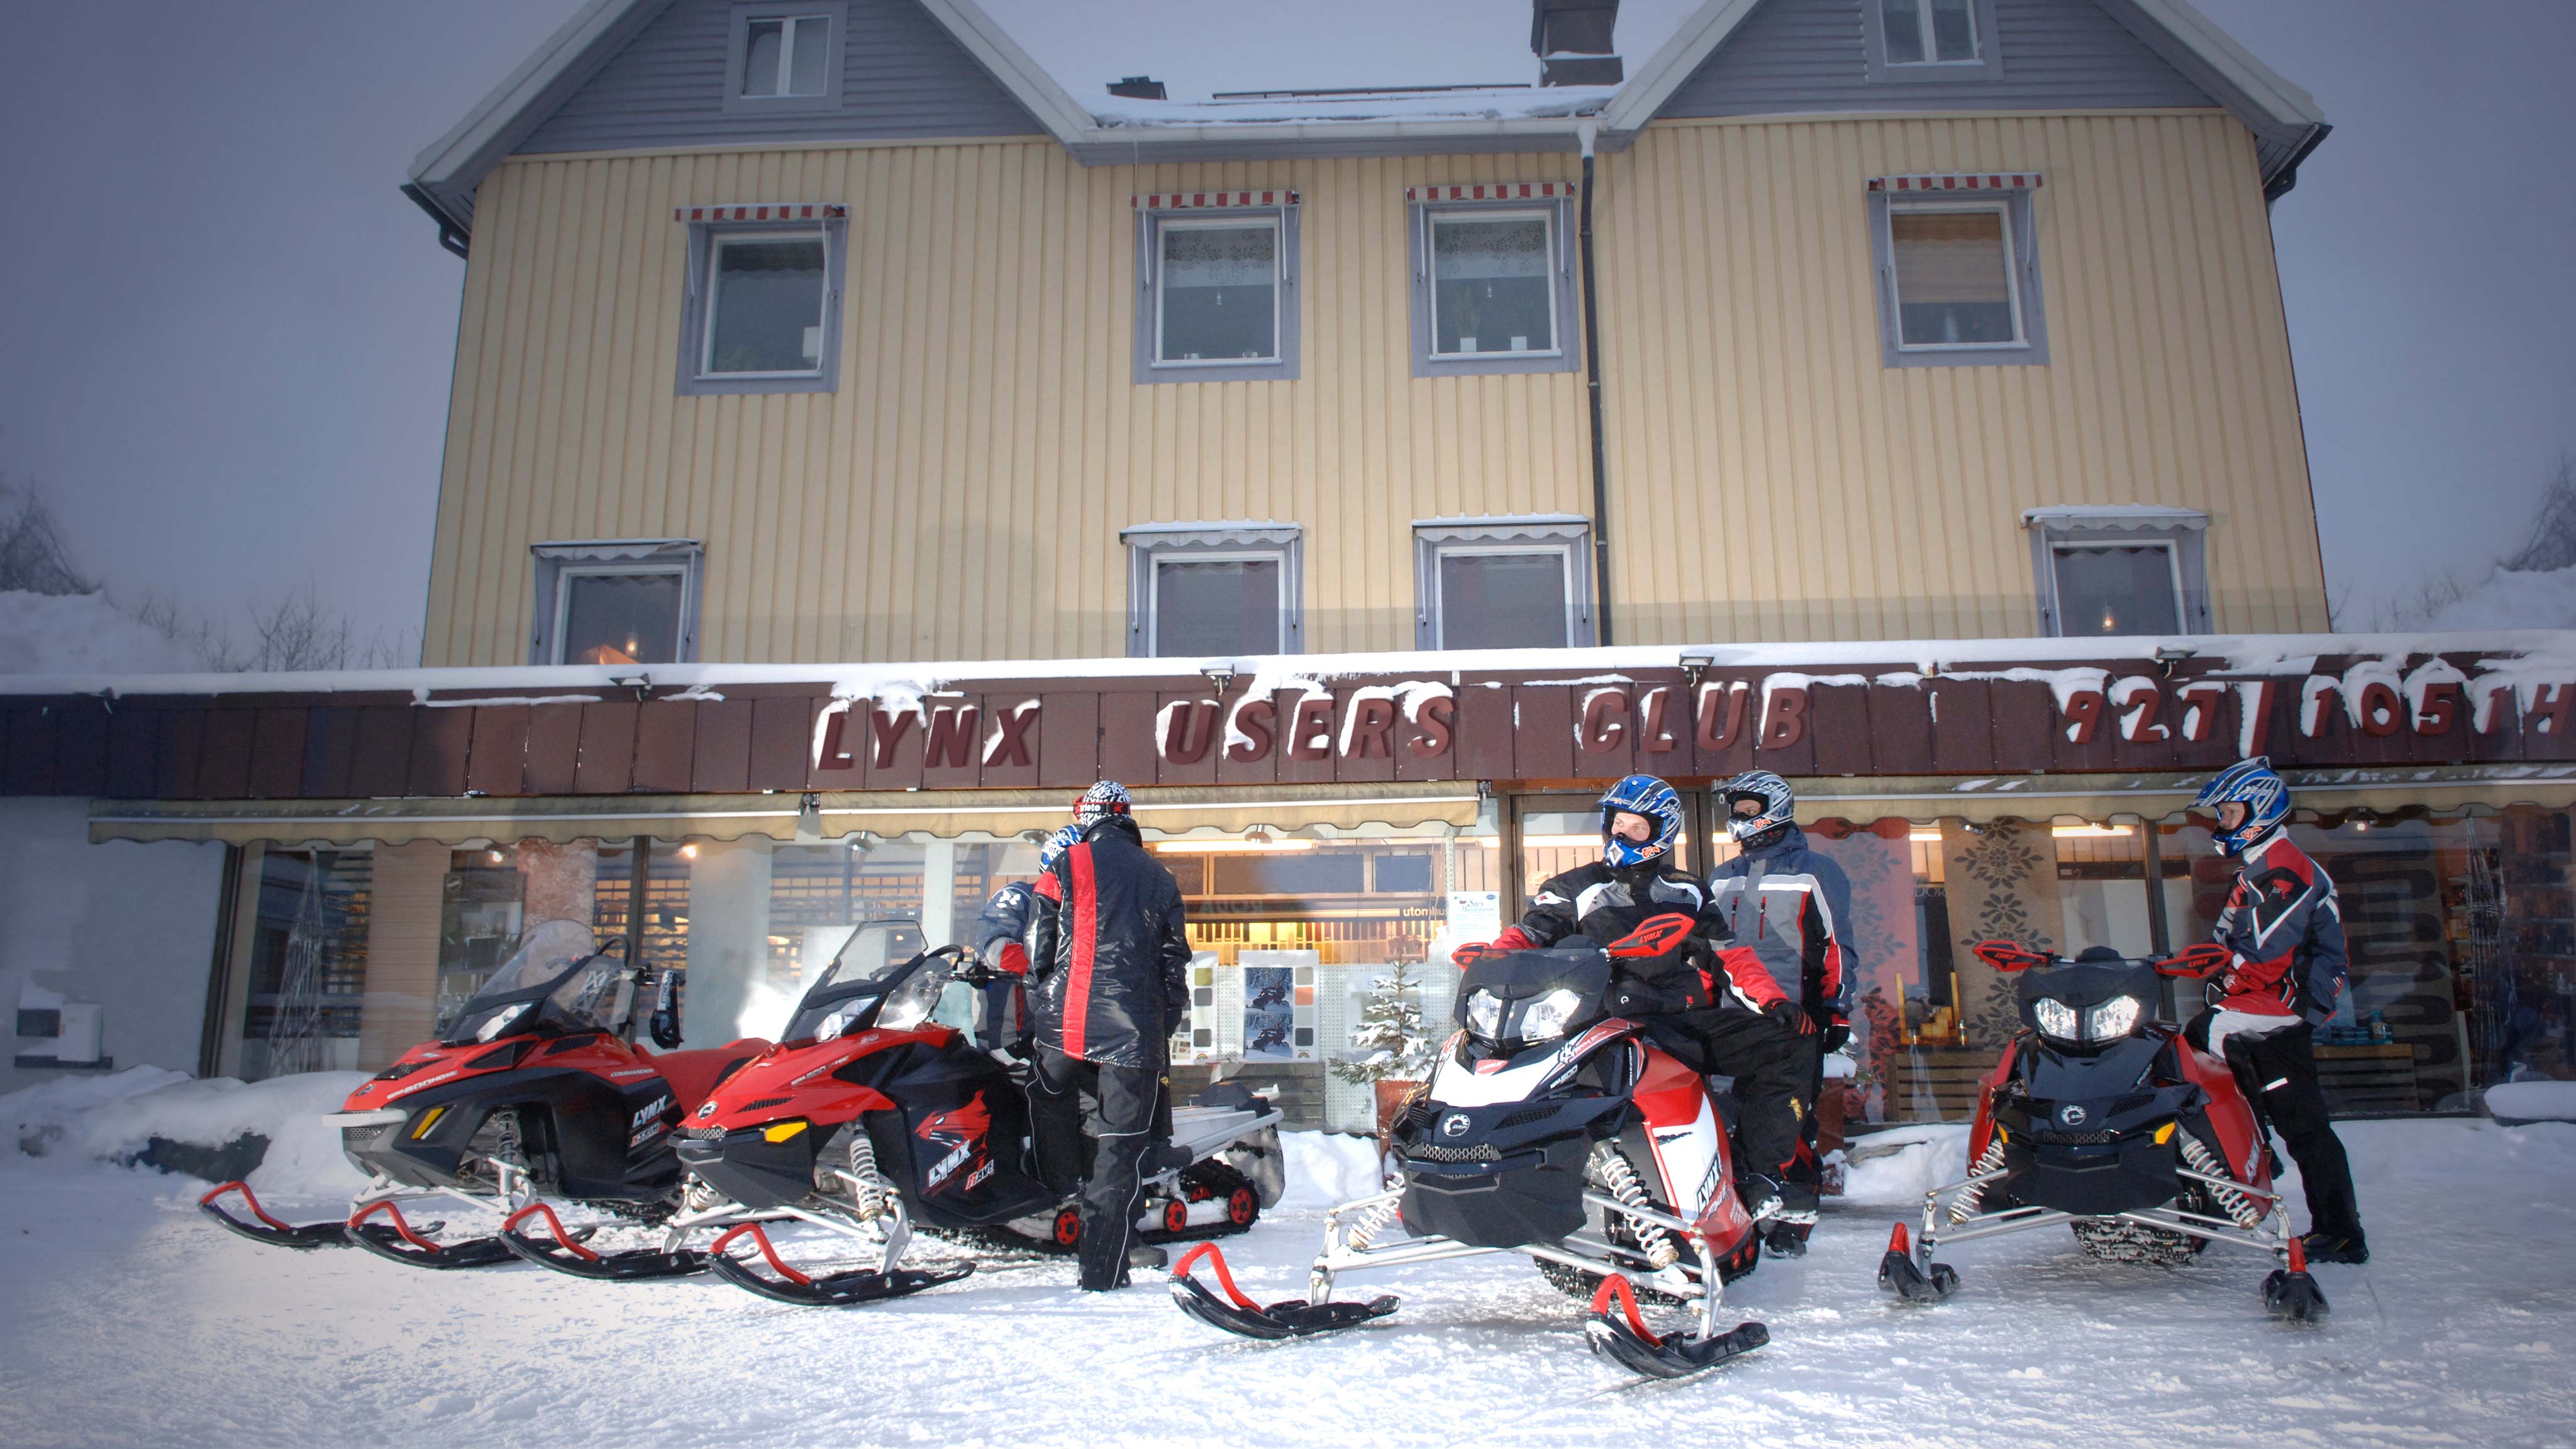 Four snowmobiles at parking lot of a shop